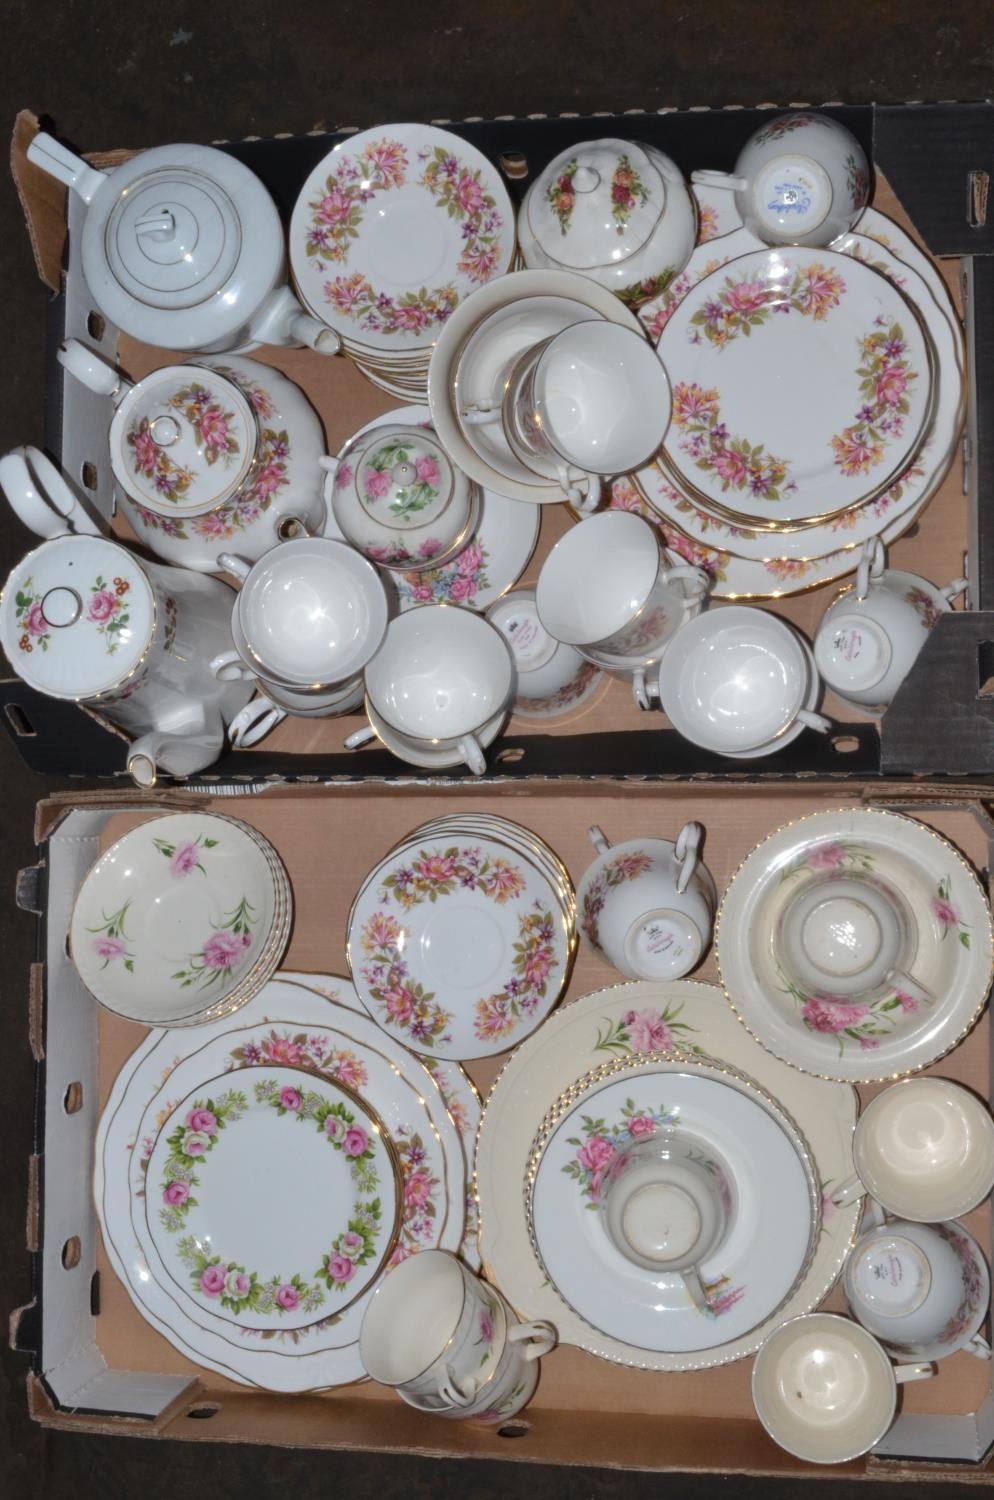 Collection of Colclough, Johnson Bros. Old English, Crown Derby etc, floral bone china tableware - Image 2 of 2